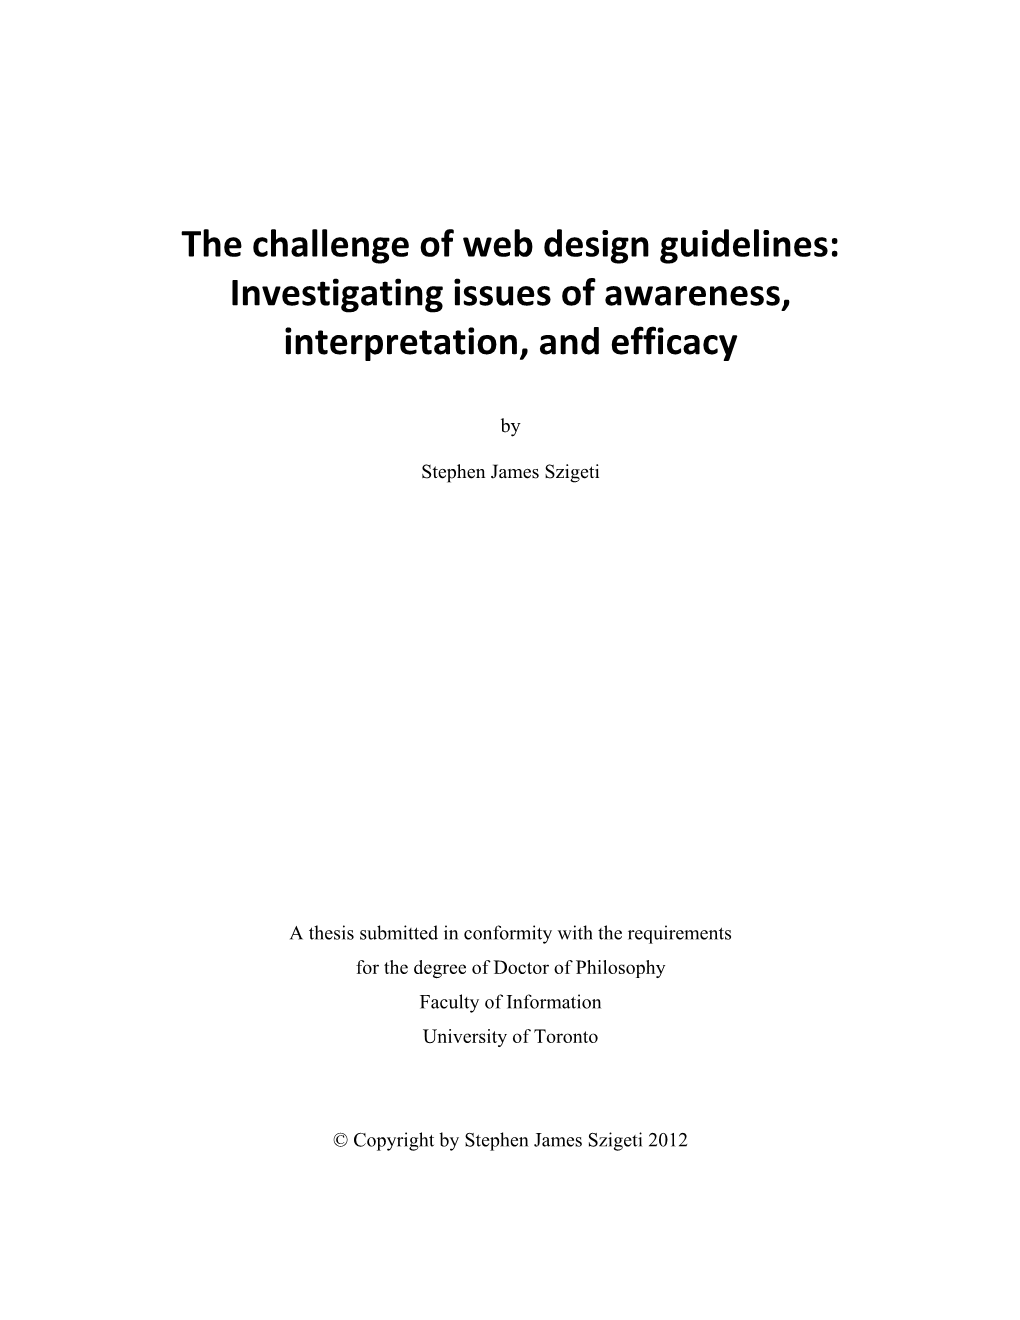 The Challenge of Web Design Guidelines: Investigating Issues of Awareness, Interpretation, and Efficacy